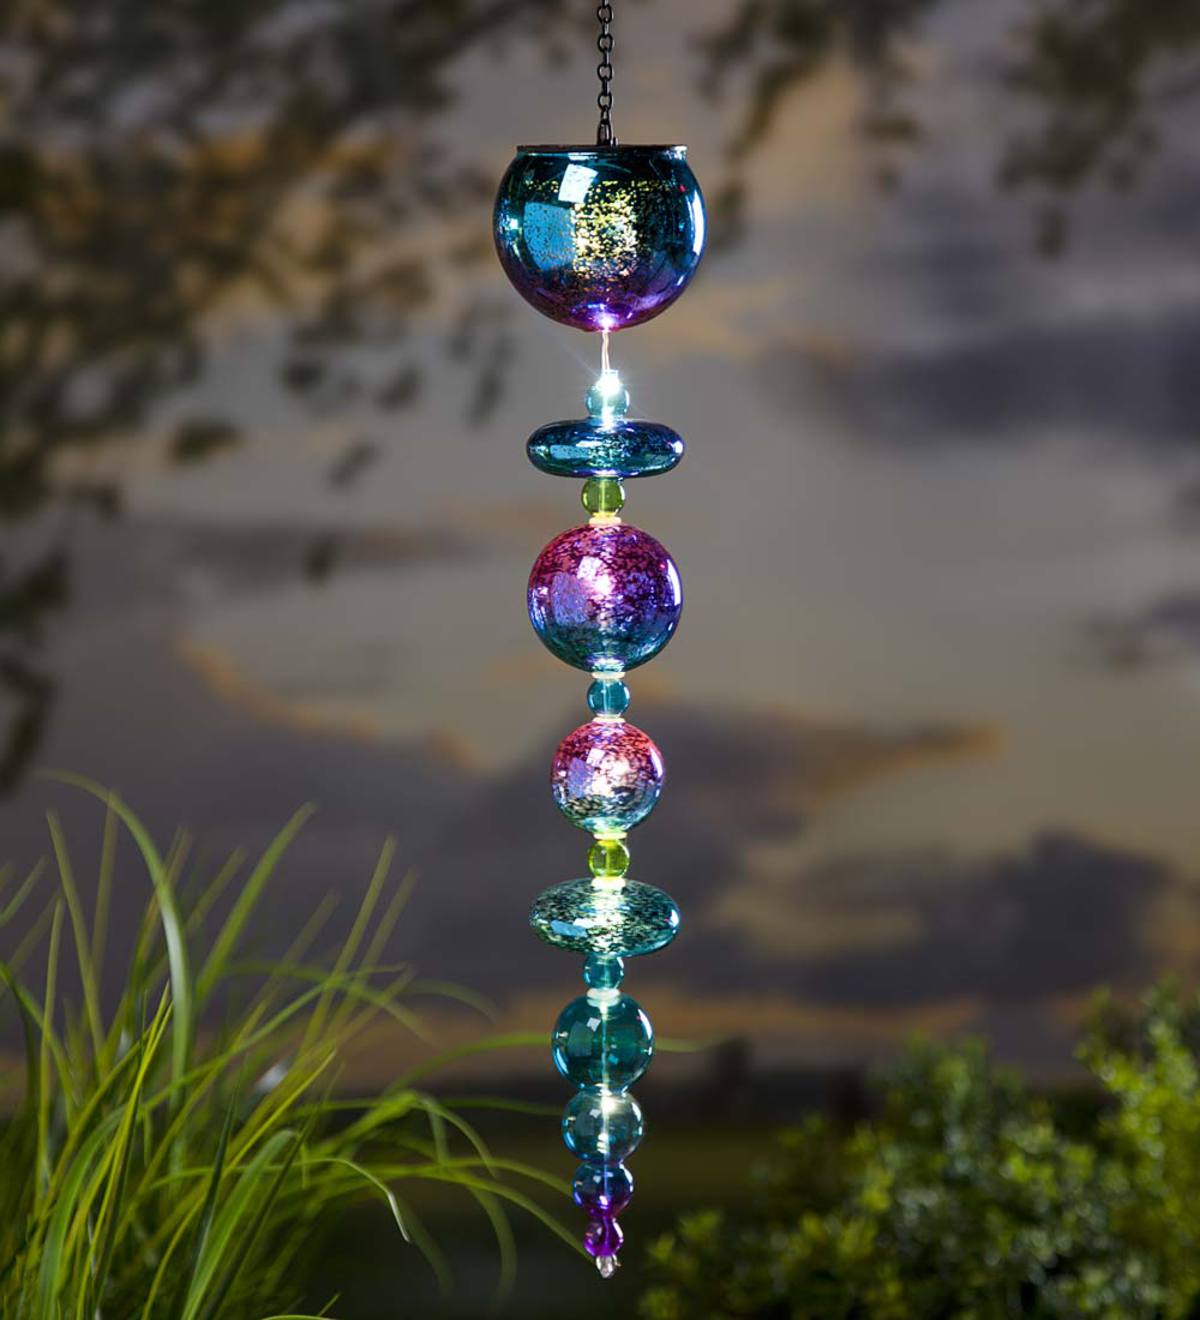 Hanging Colorful Mercury Glass Ornament with Solar-Powered Light